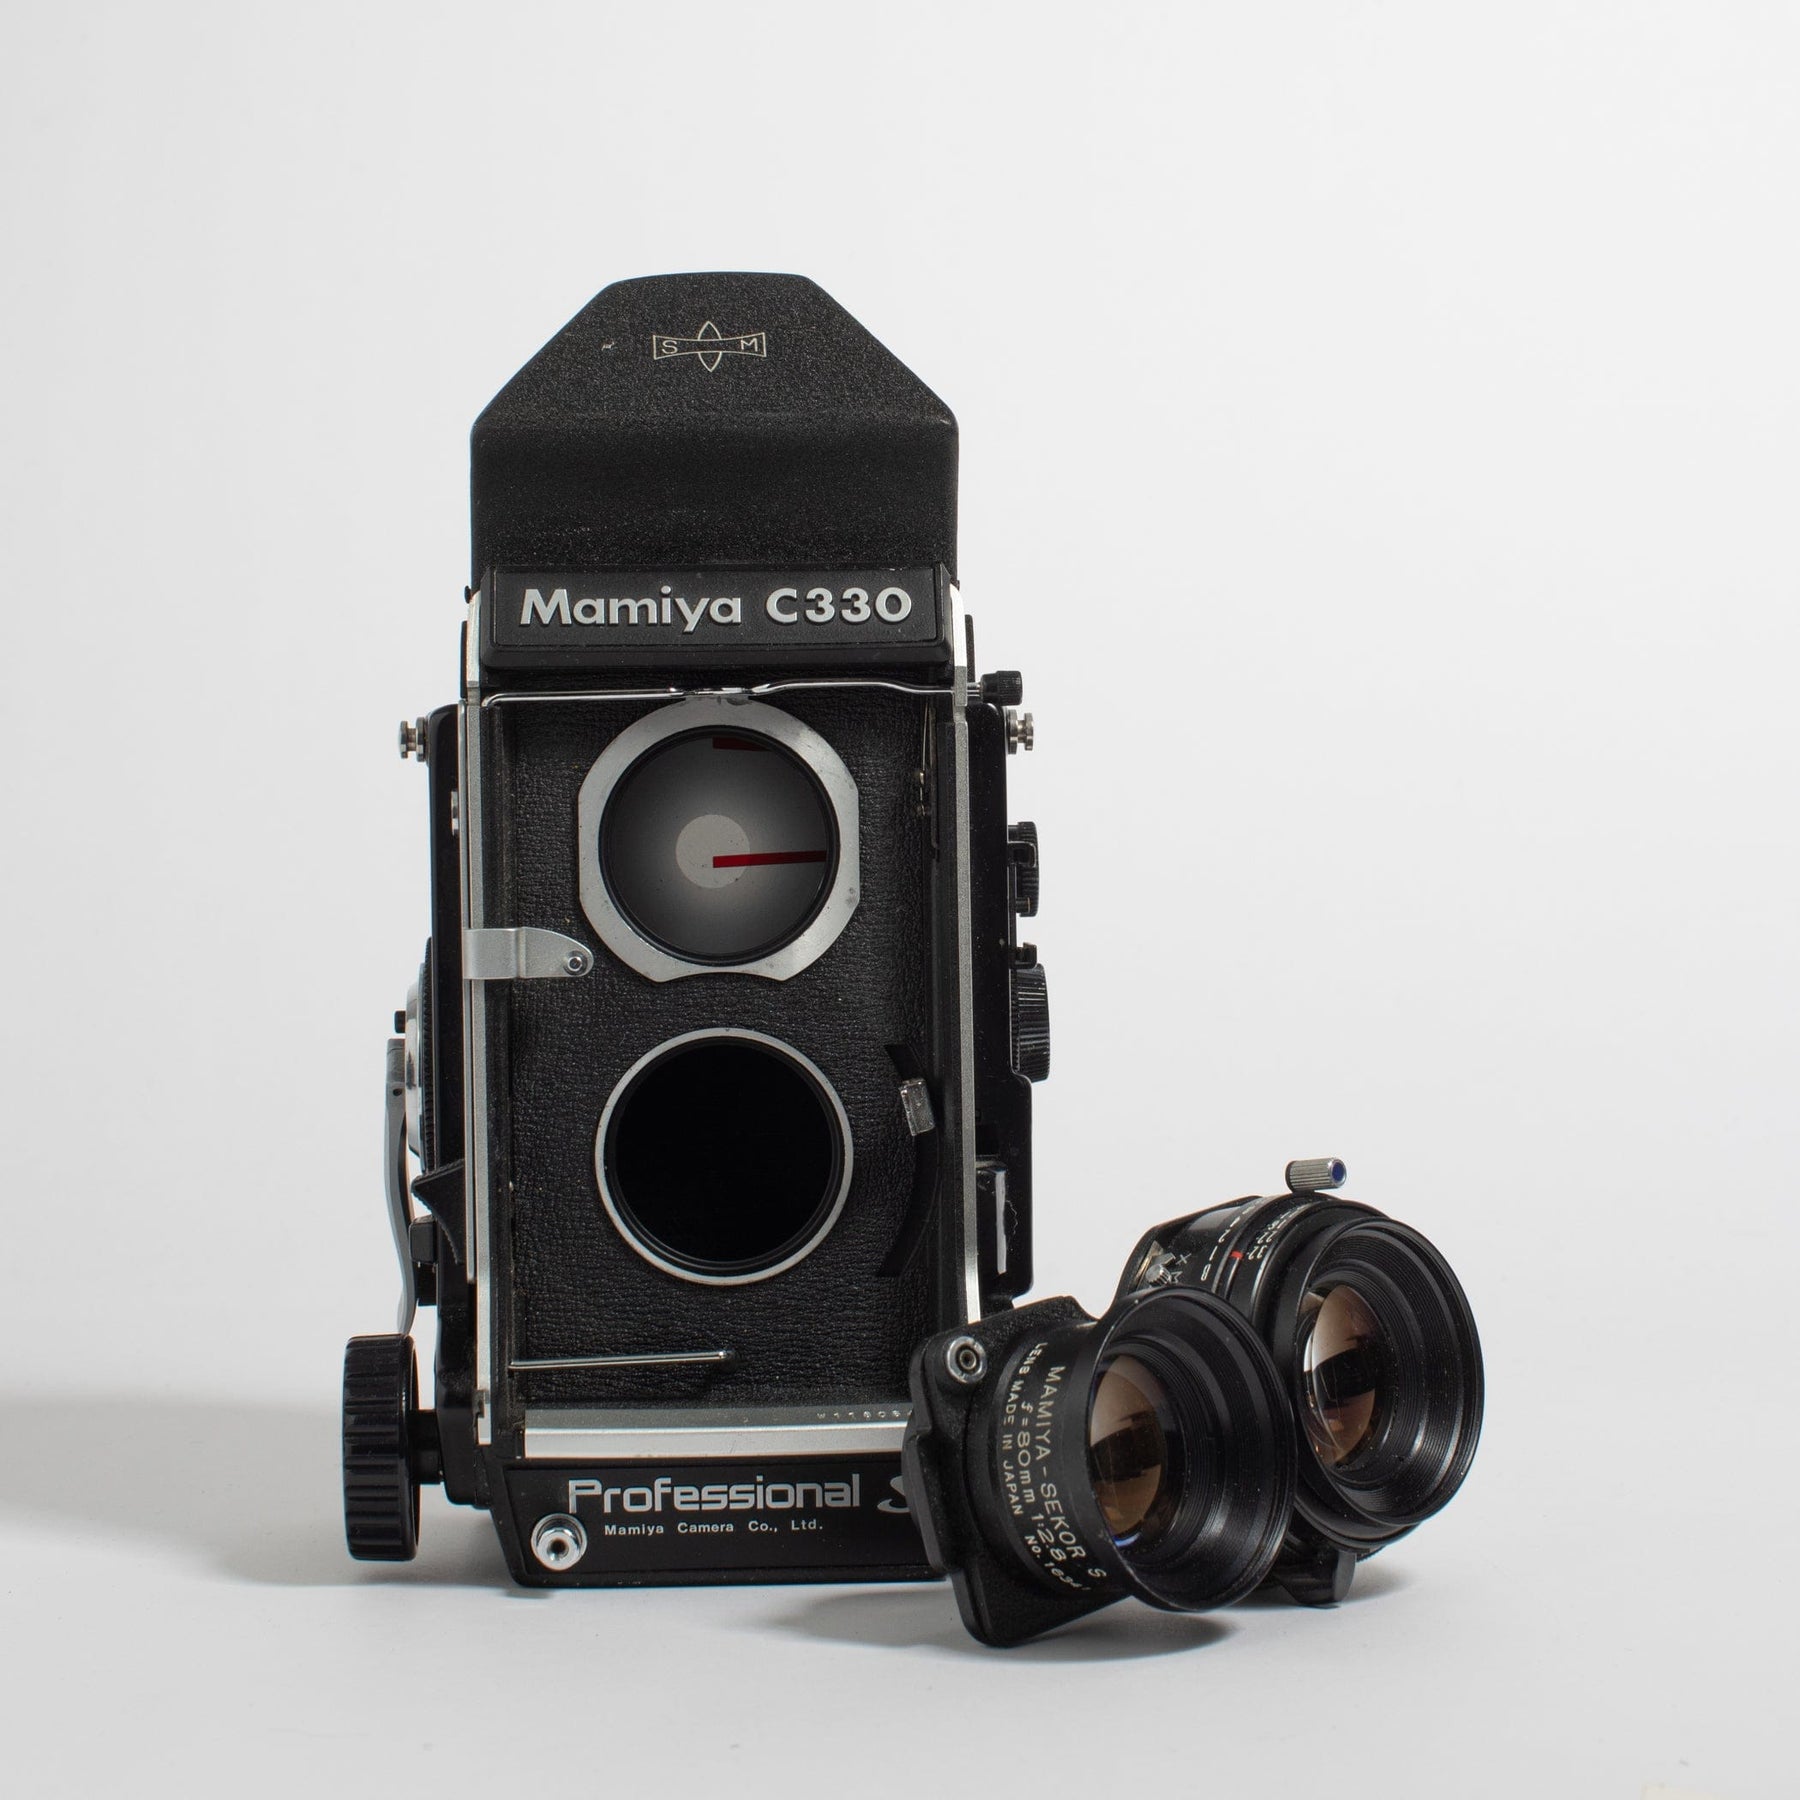 Mamiya C330 Professional S with 80mm f2.8 Lens and Eye Level